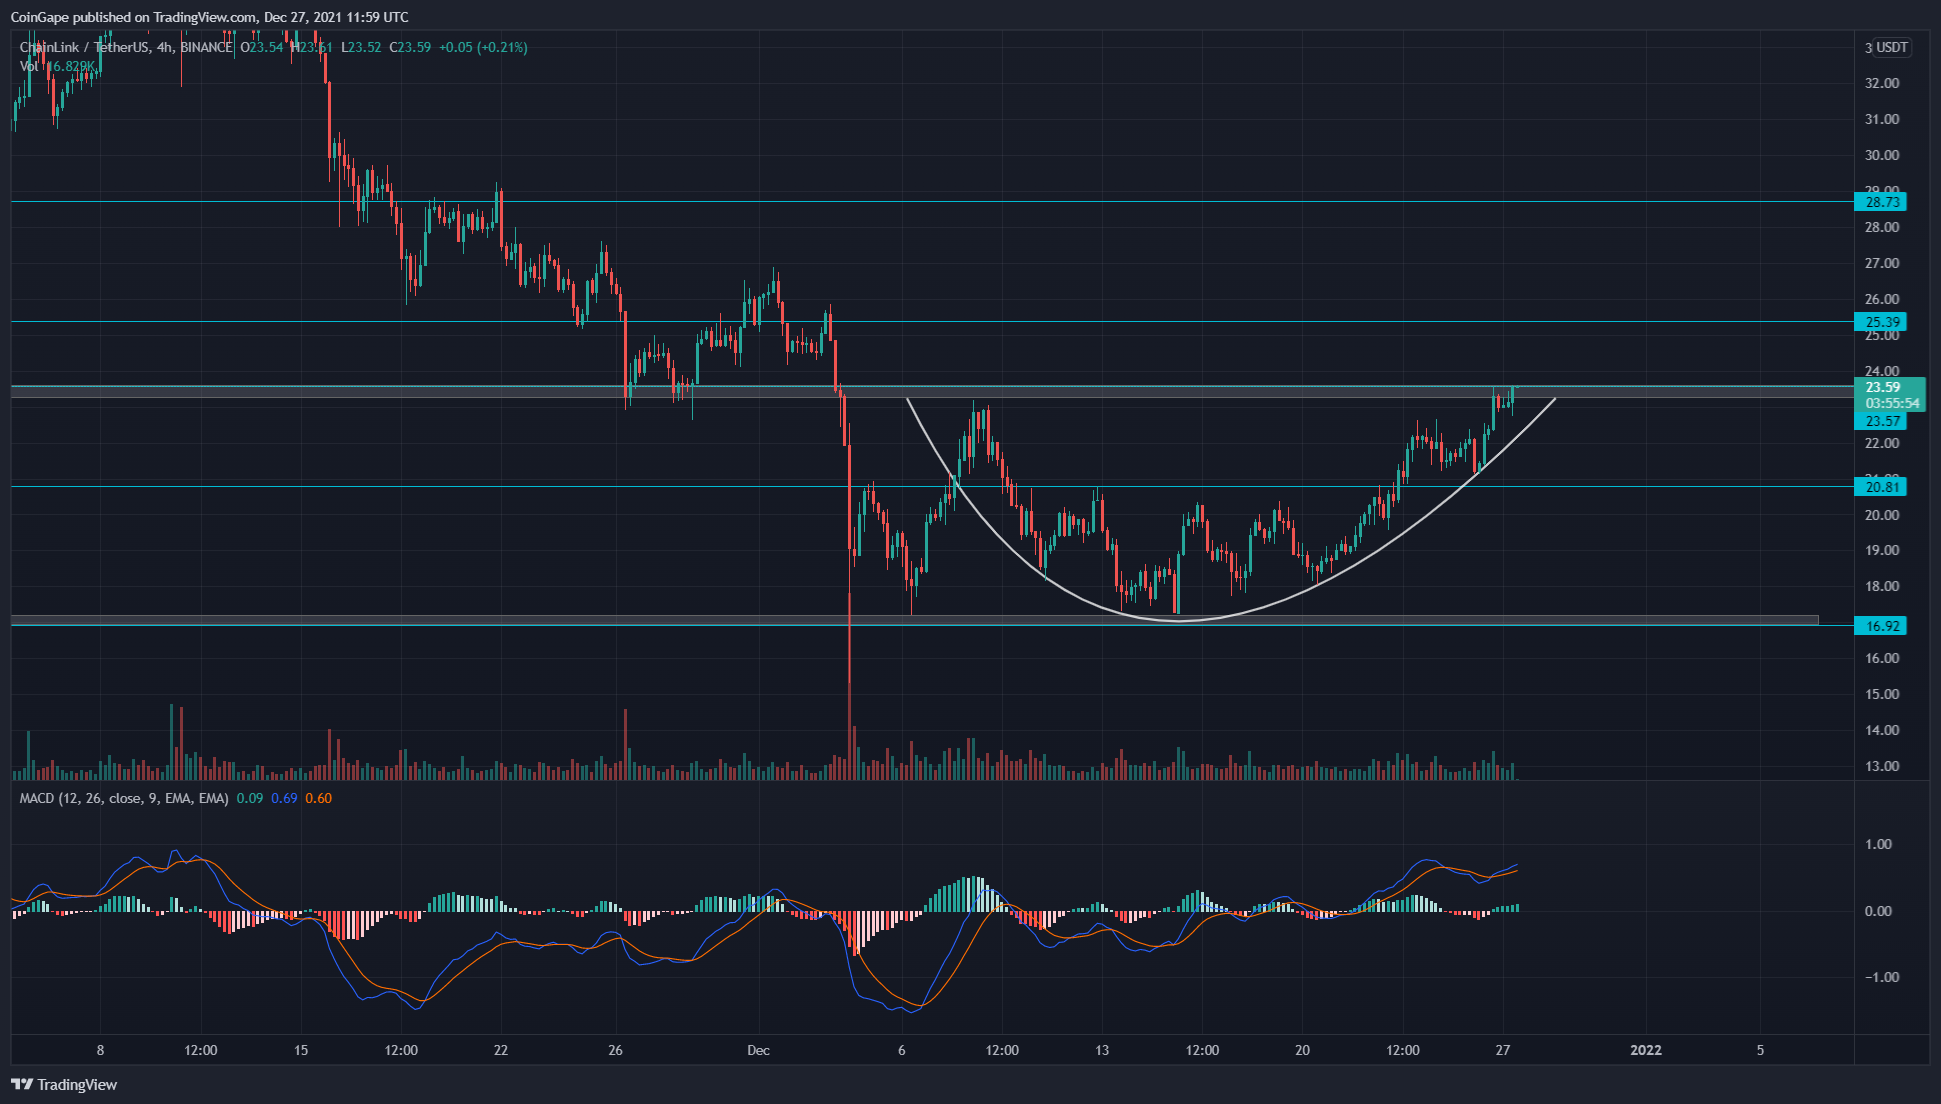 Chainlink Price Analysis: LINK Token challenges $23.5 resistance for bullish breakout